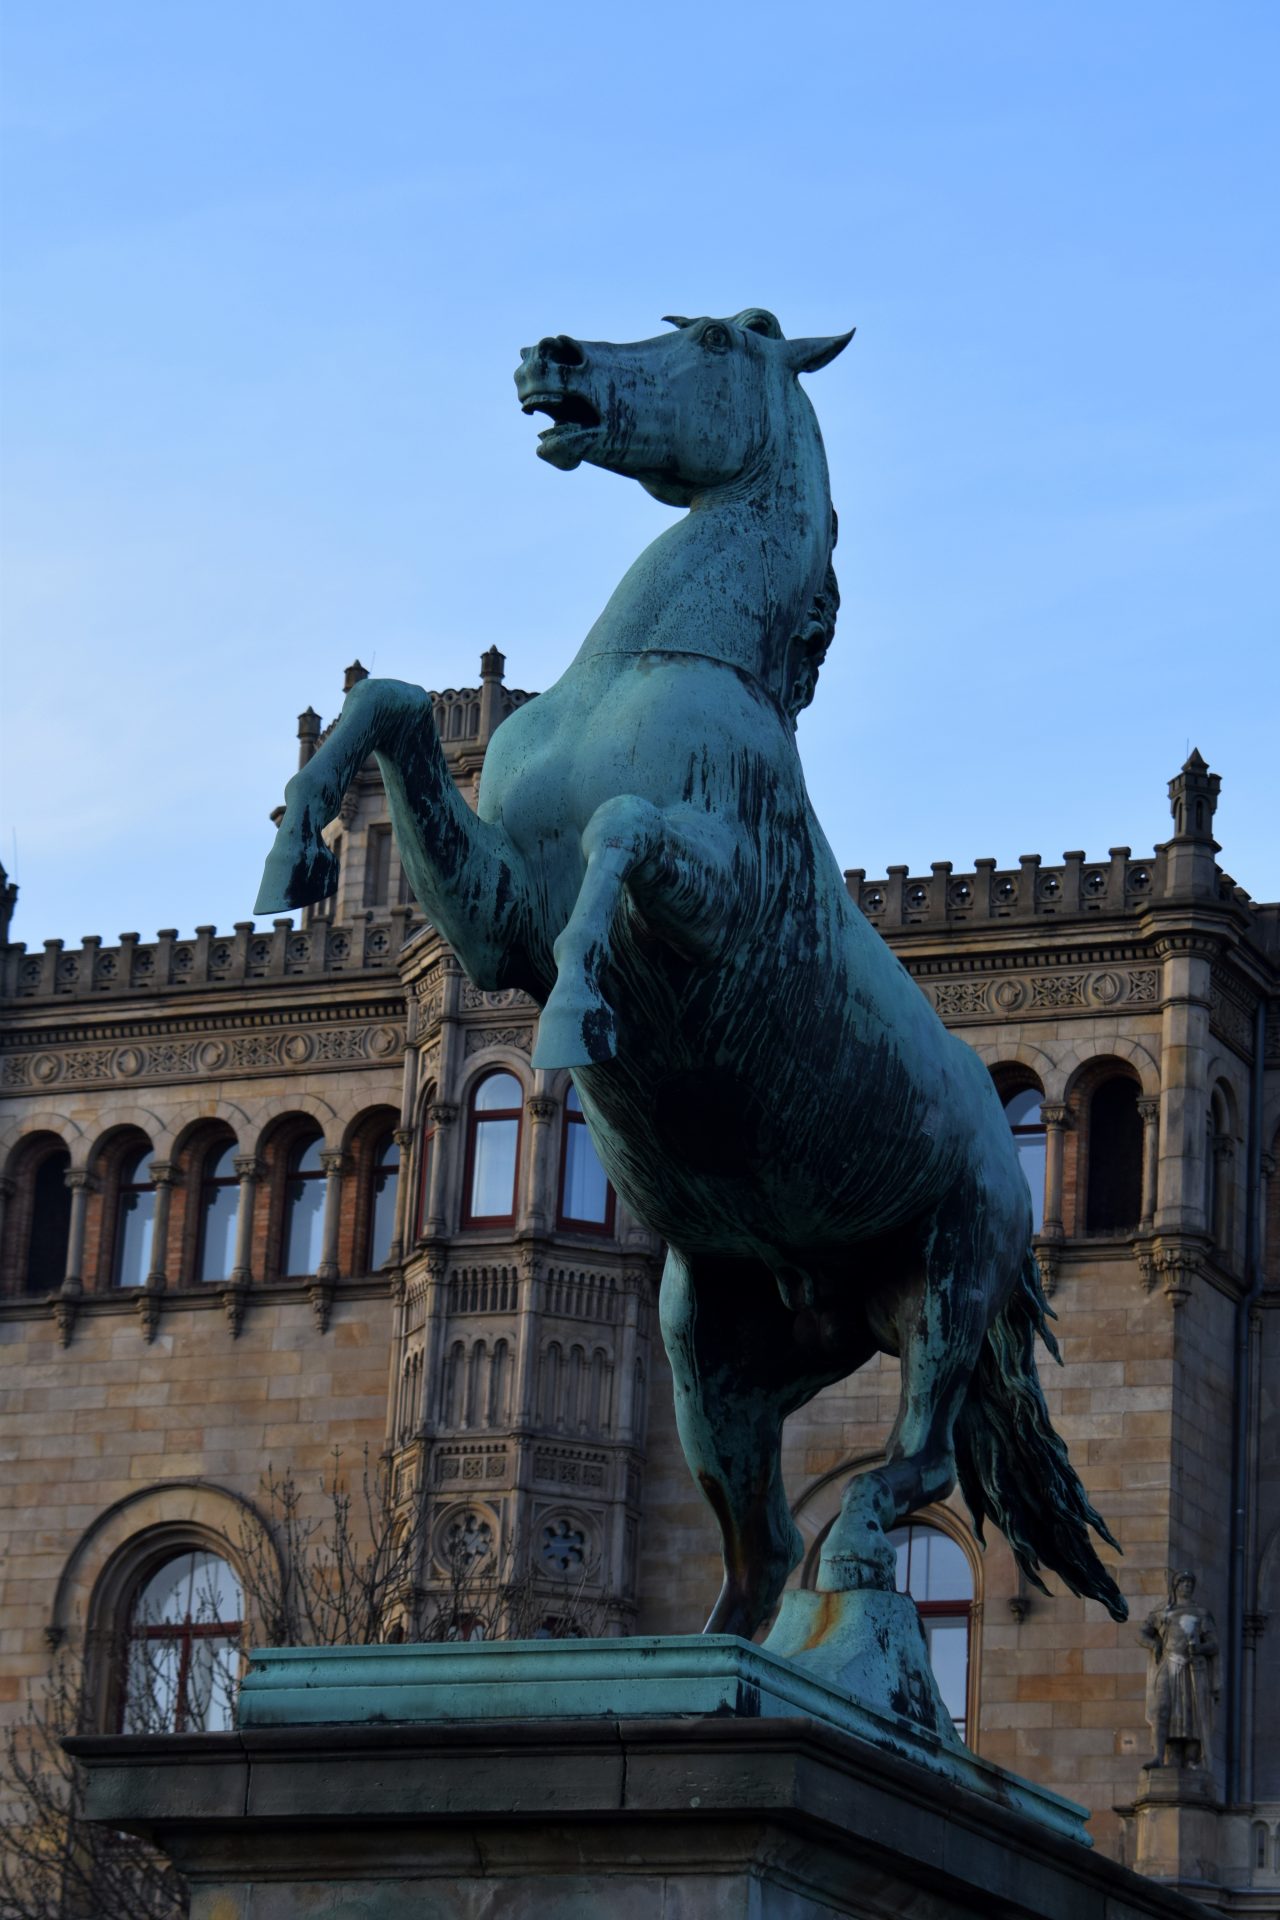 The Horse of Lower Saxony